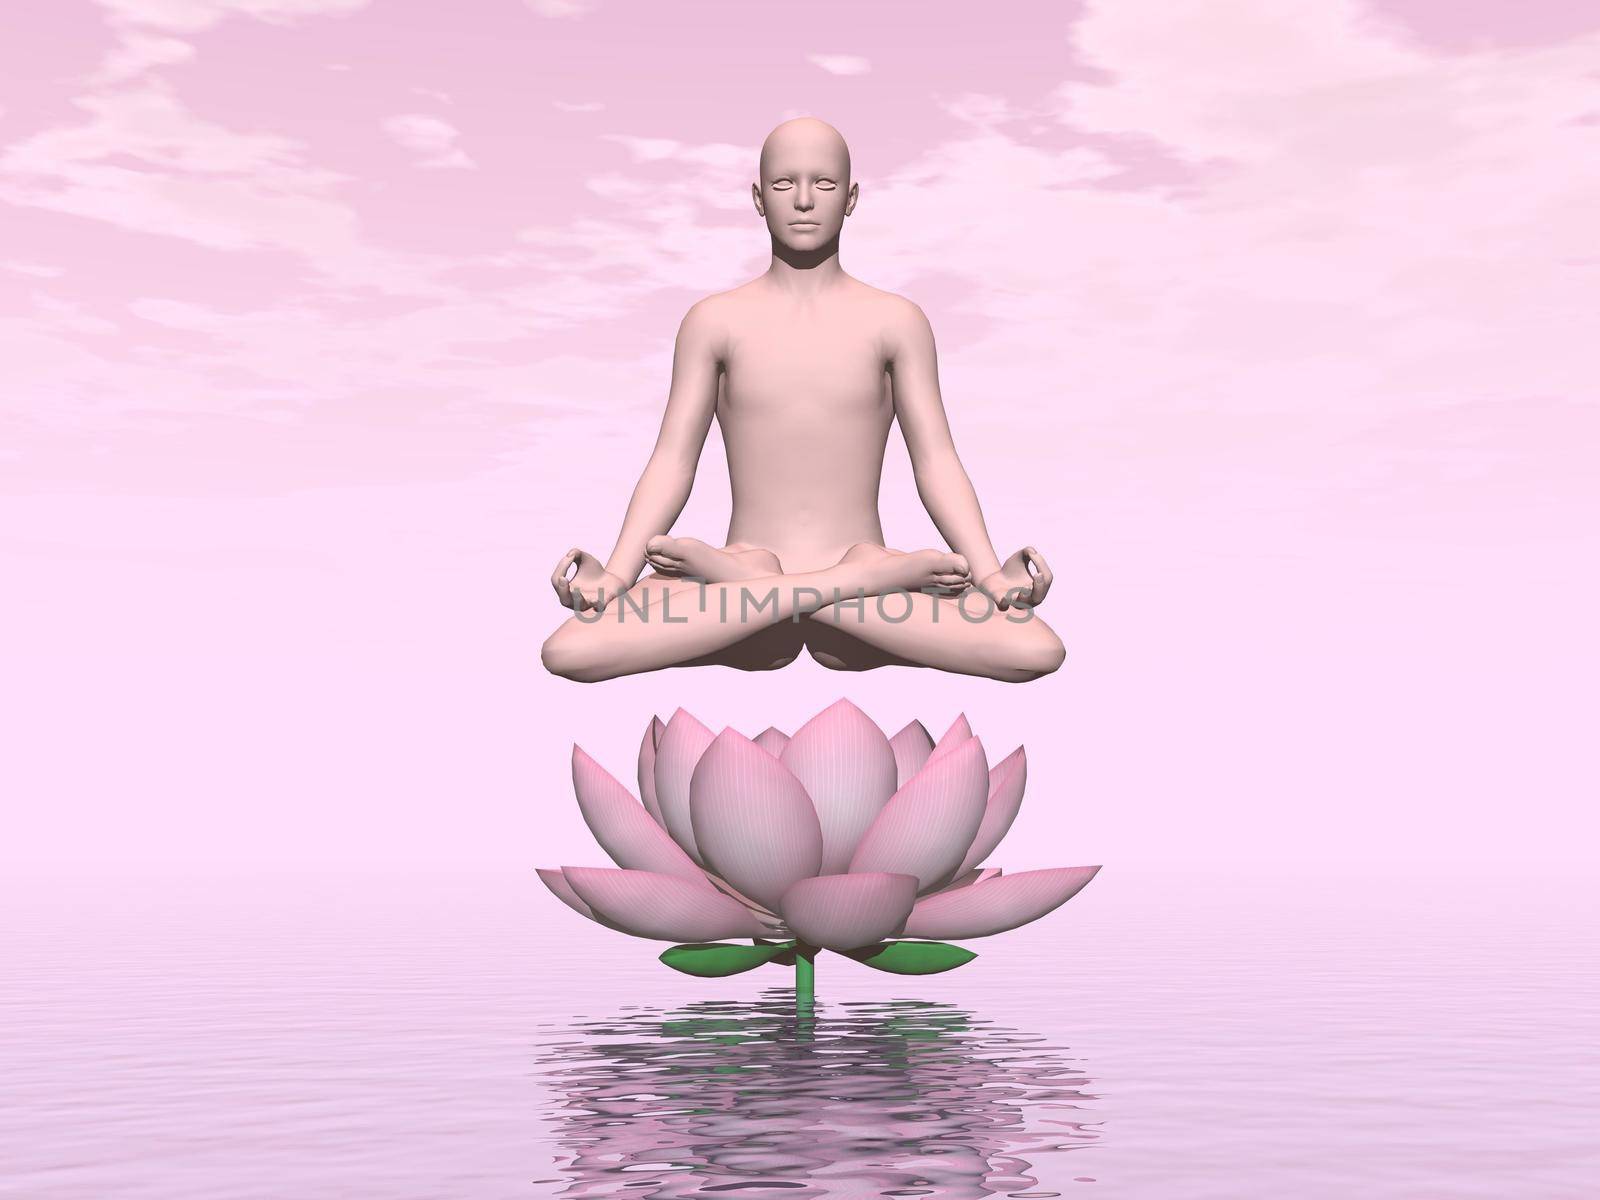 One human meditating upon a lily flower and water in pink background